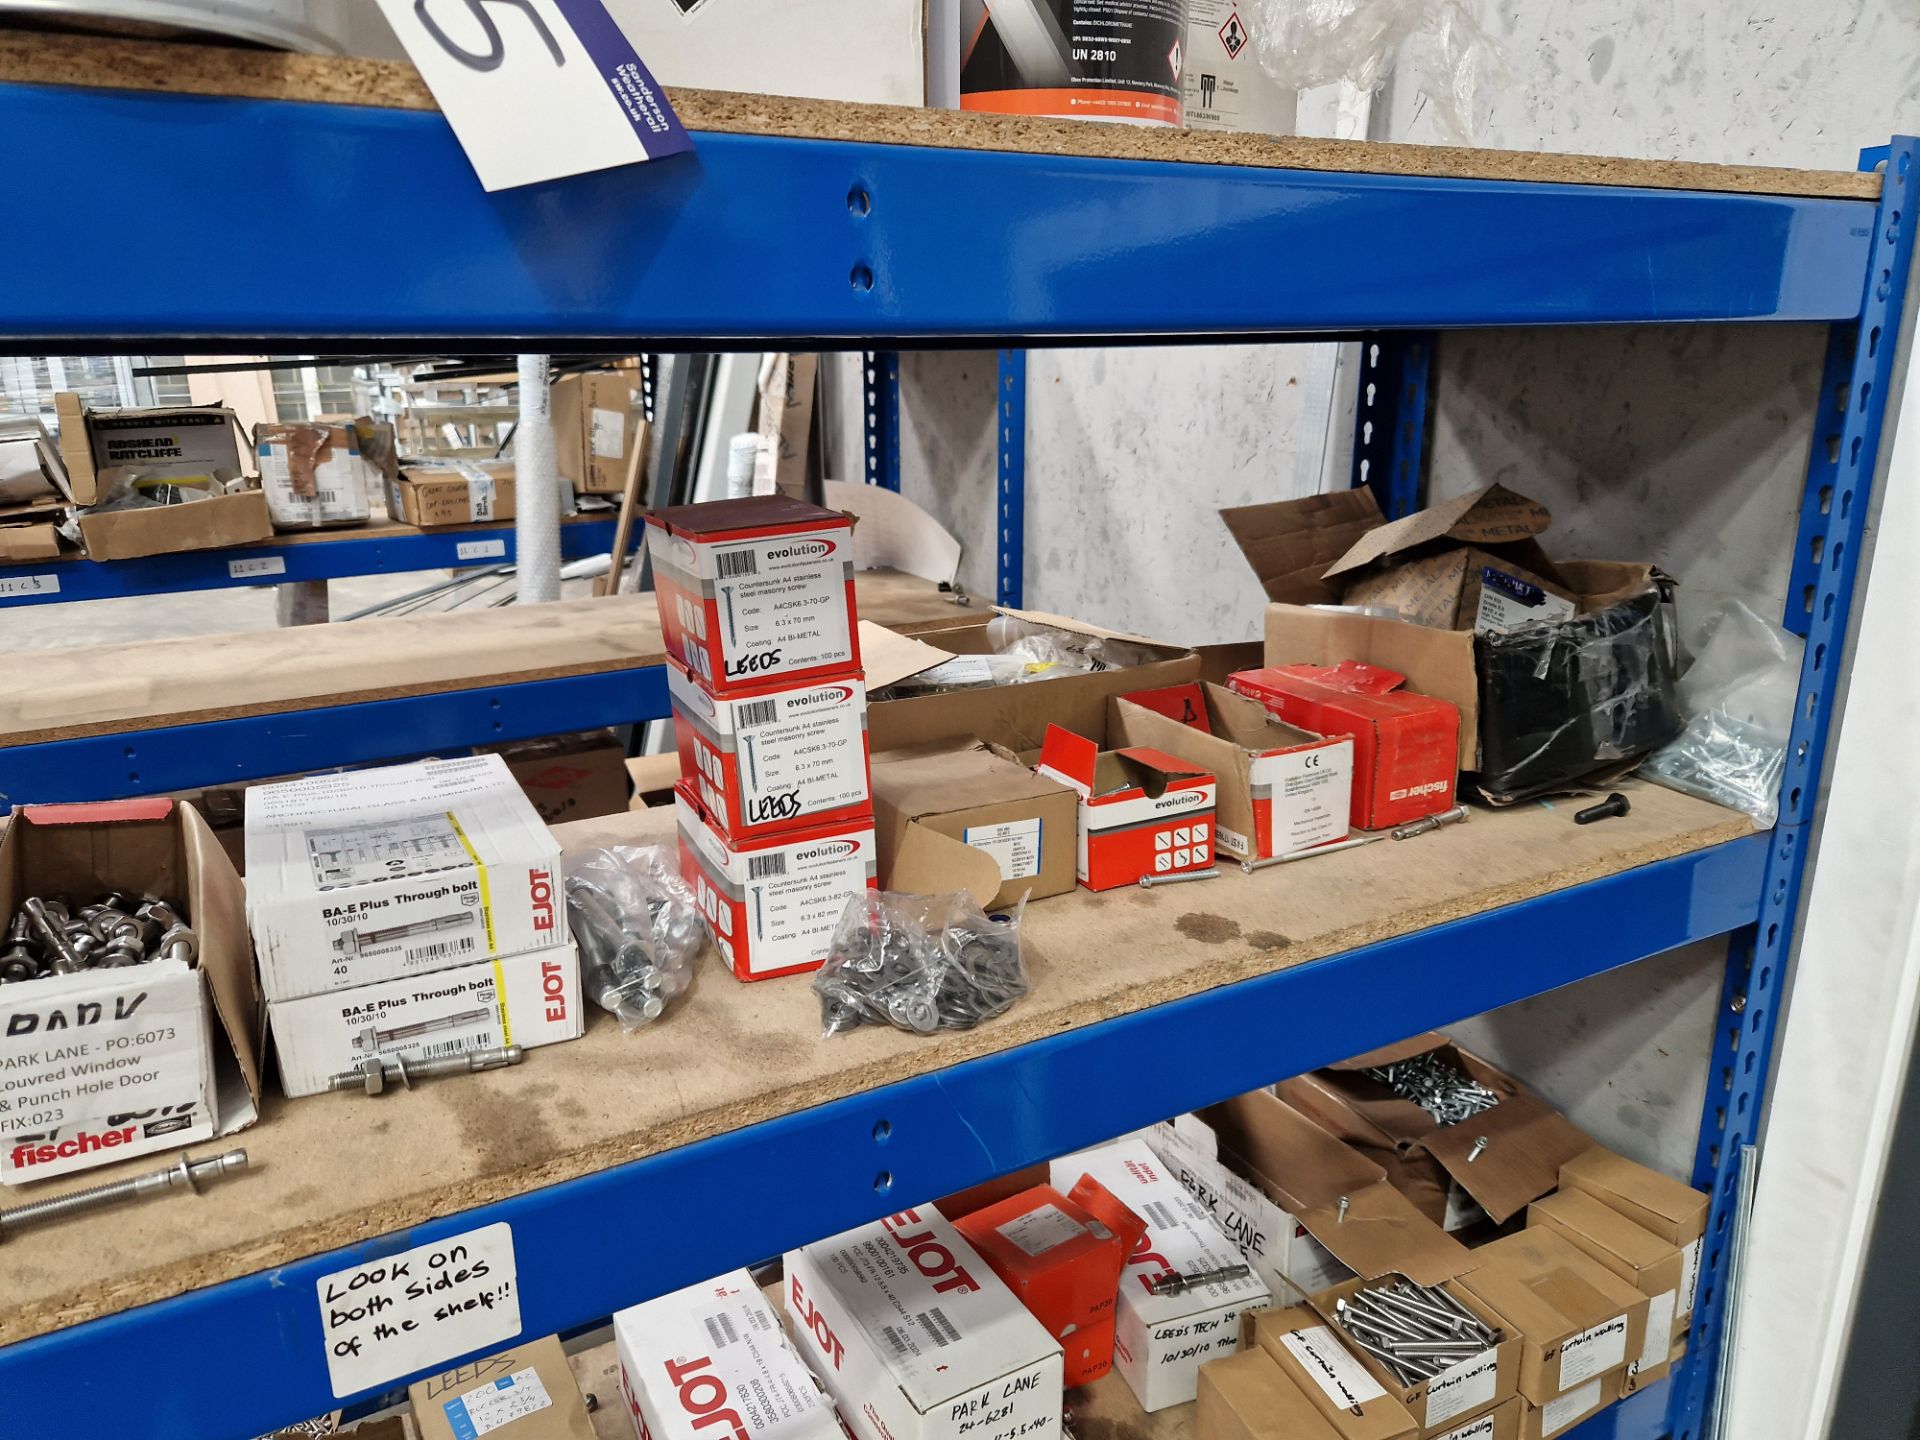 Fixtures and Fittings Contents to One Bay of Racking, including Nuts, Bolts, Rivets, Screws, etc - Bild 7 aus 7